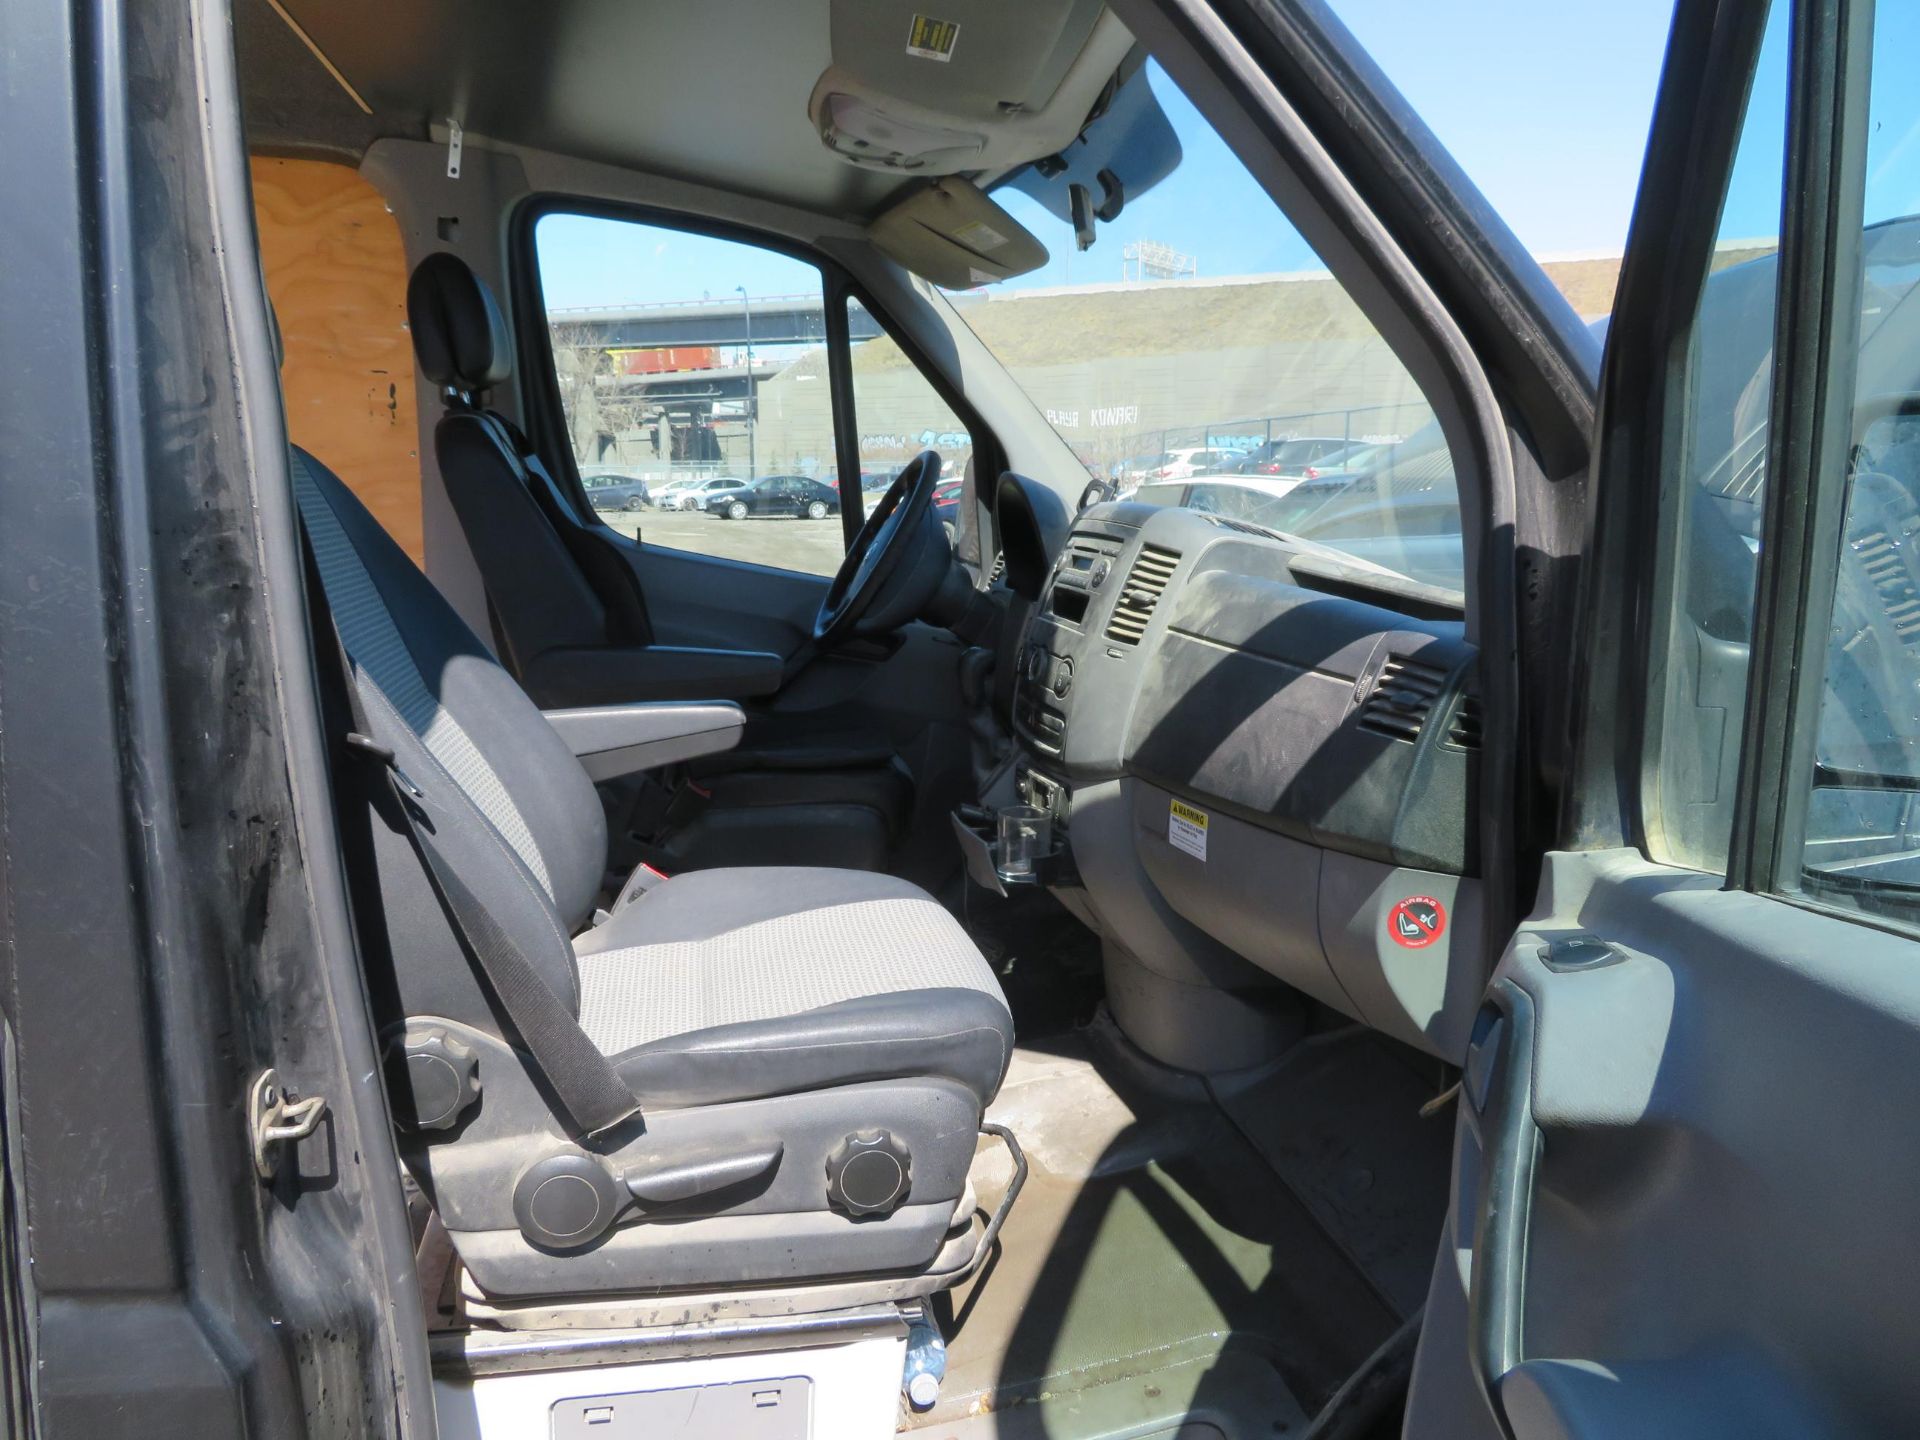 DODGE Sprinter 2007 CRD, 170 000 KM, Diesel, 3.0 L, Automatic, 18ft long, air (walk-in) VIN: - Image 7 of 8